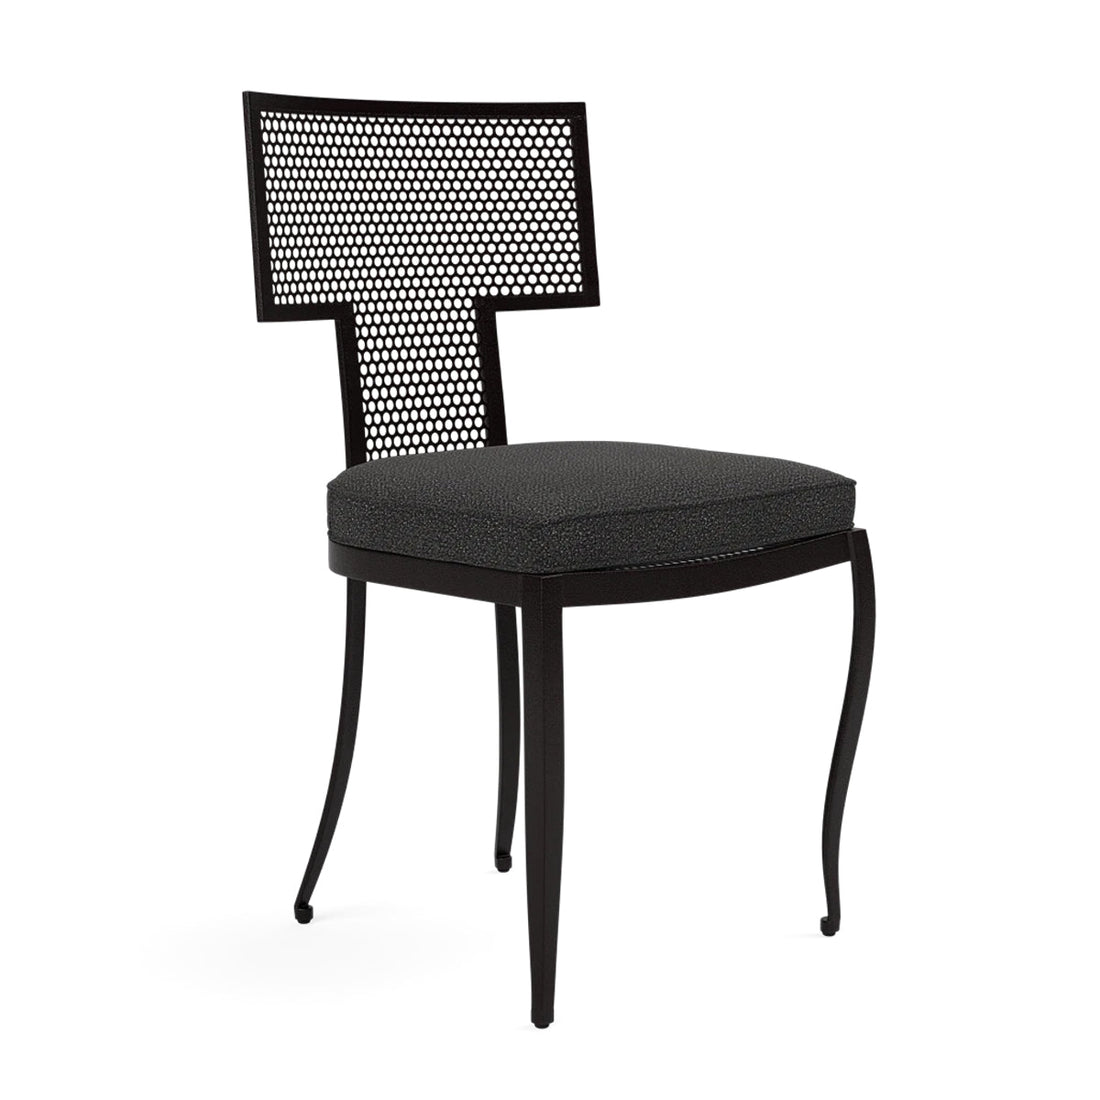 Made Goods Hadley Metal Outdoor Dining Chair in Lambro Boucle